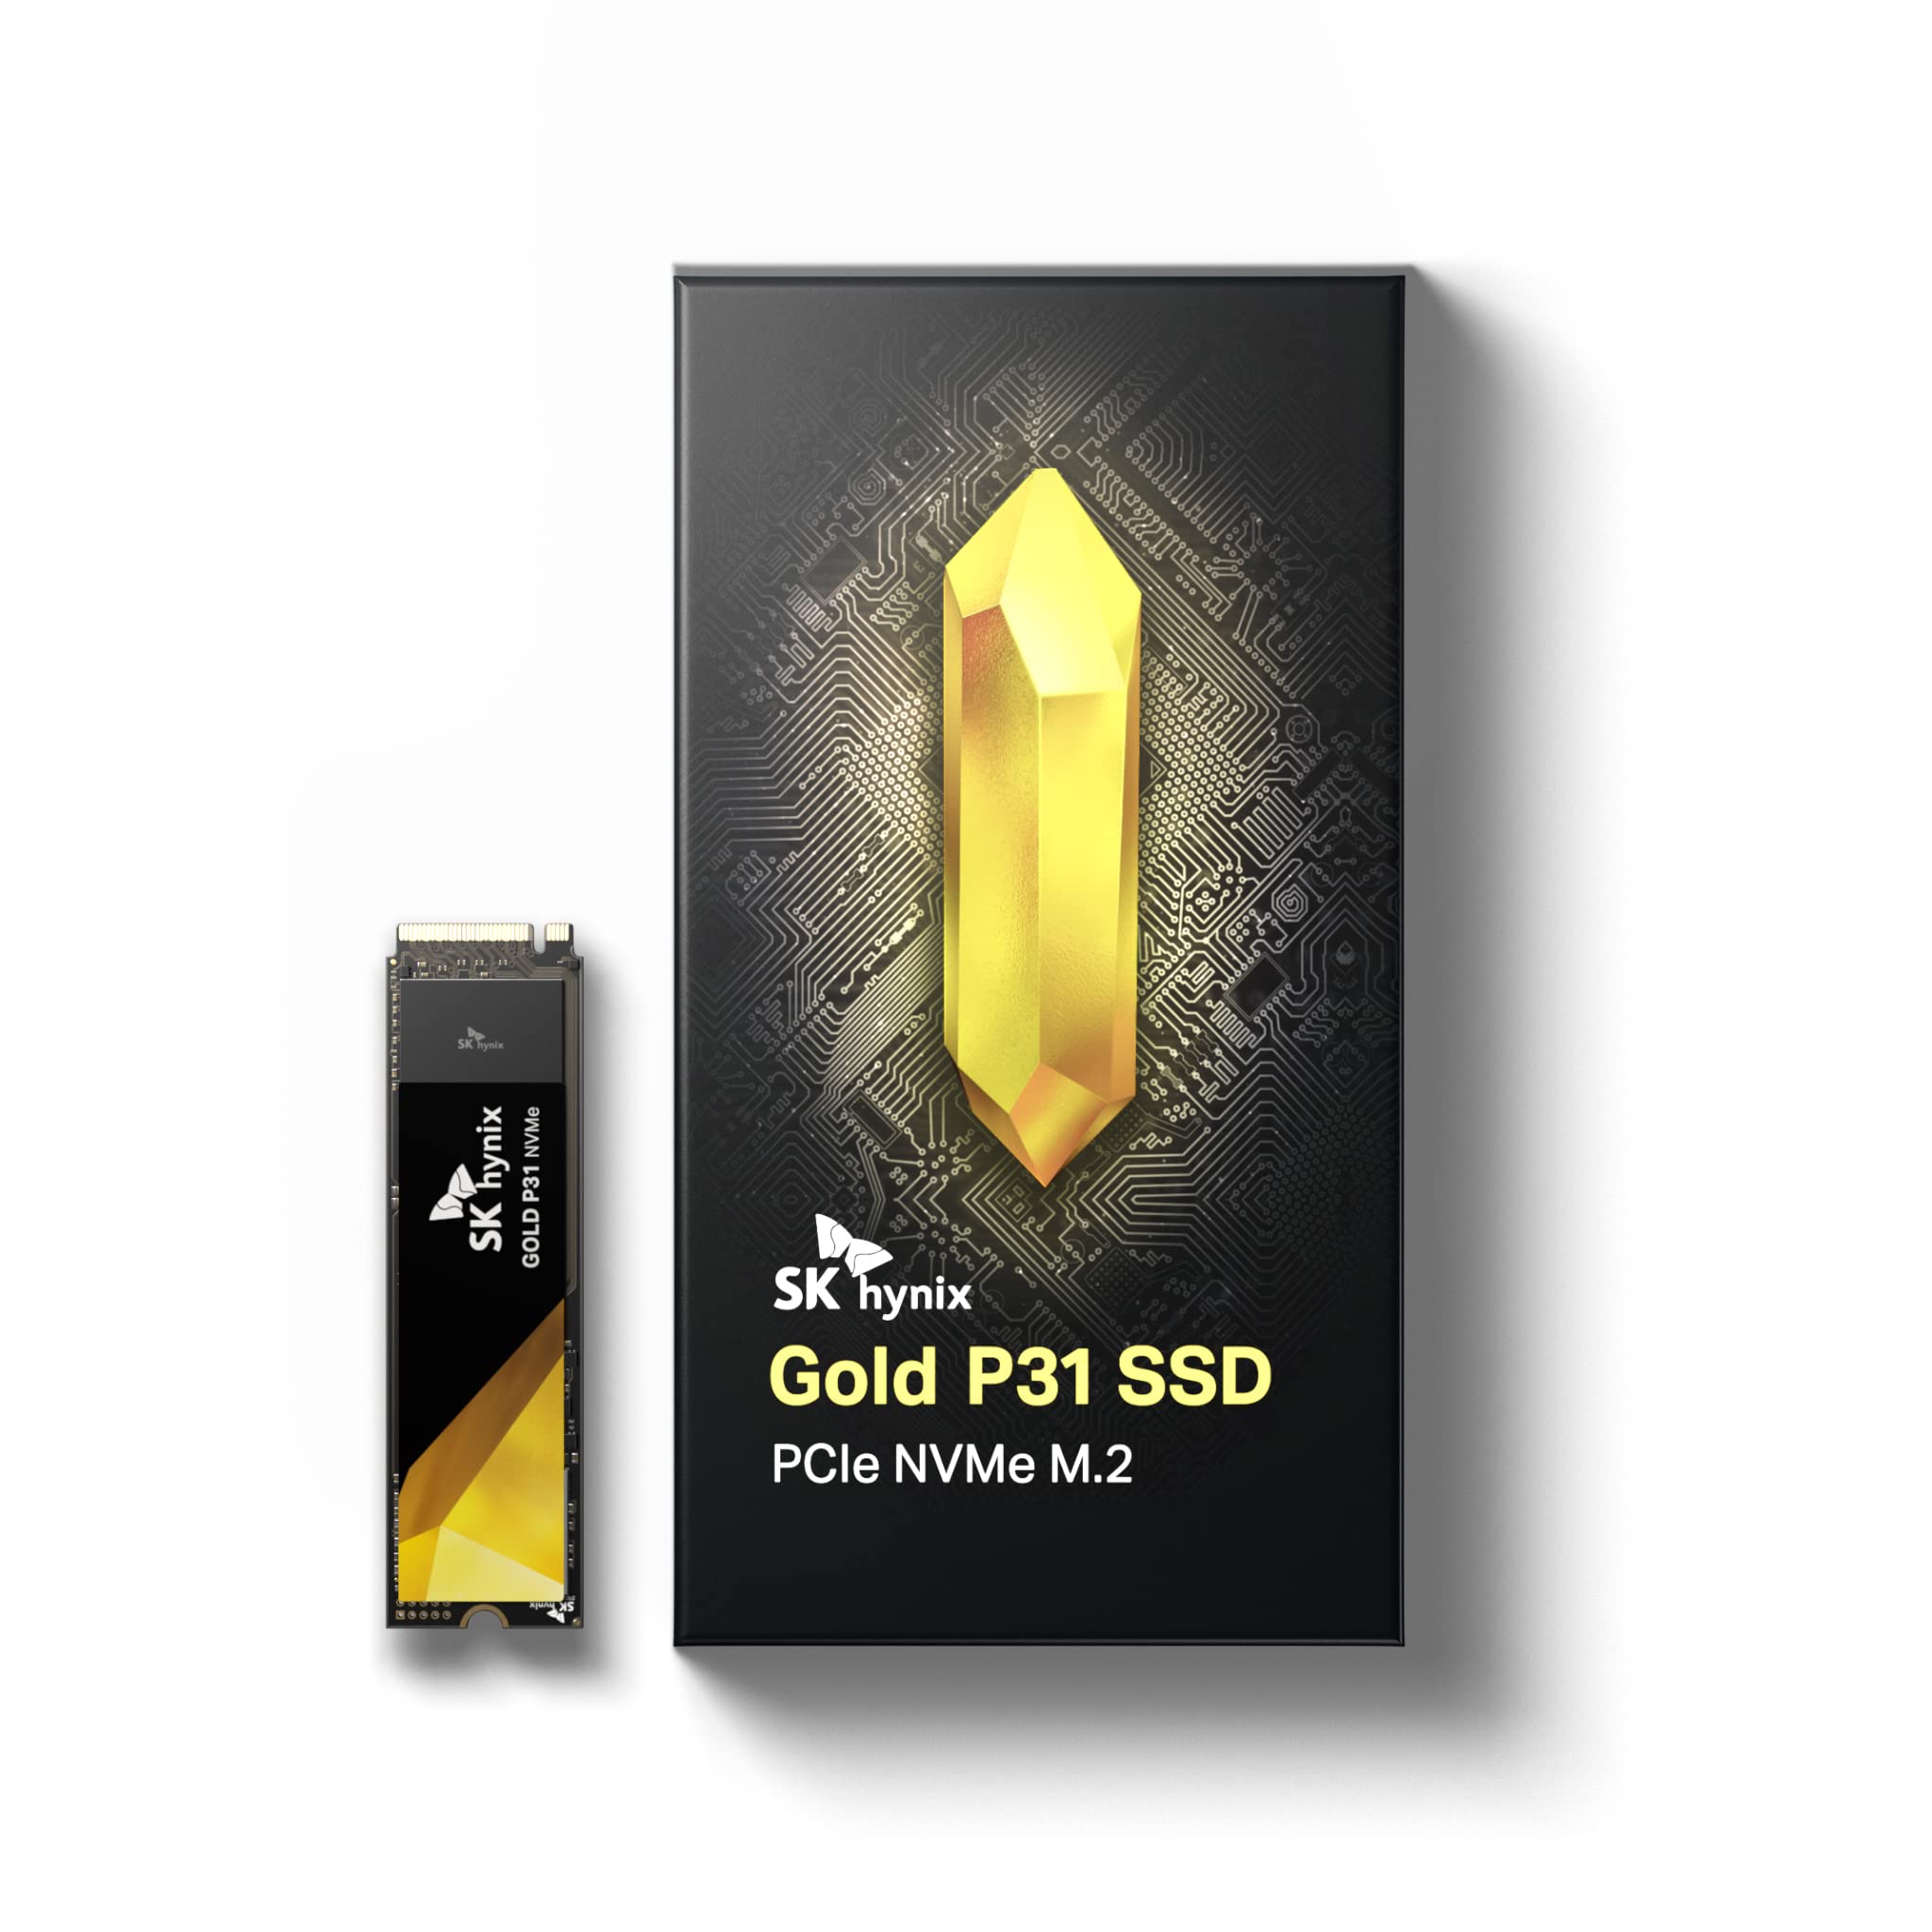 SK hynix Gold P31 2TB PCIe NVMe Gen3 M.2 2280 Internal SSD, Up to 3500MB/S, Compact, Form Factor SSD - Internal Solid State Drive with 128-Layer NAND Flash $92.95